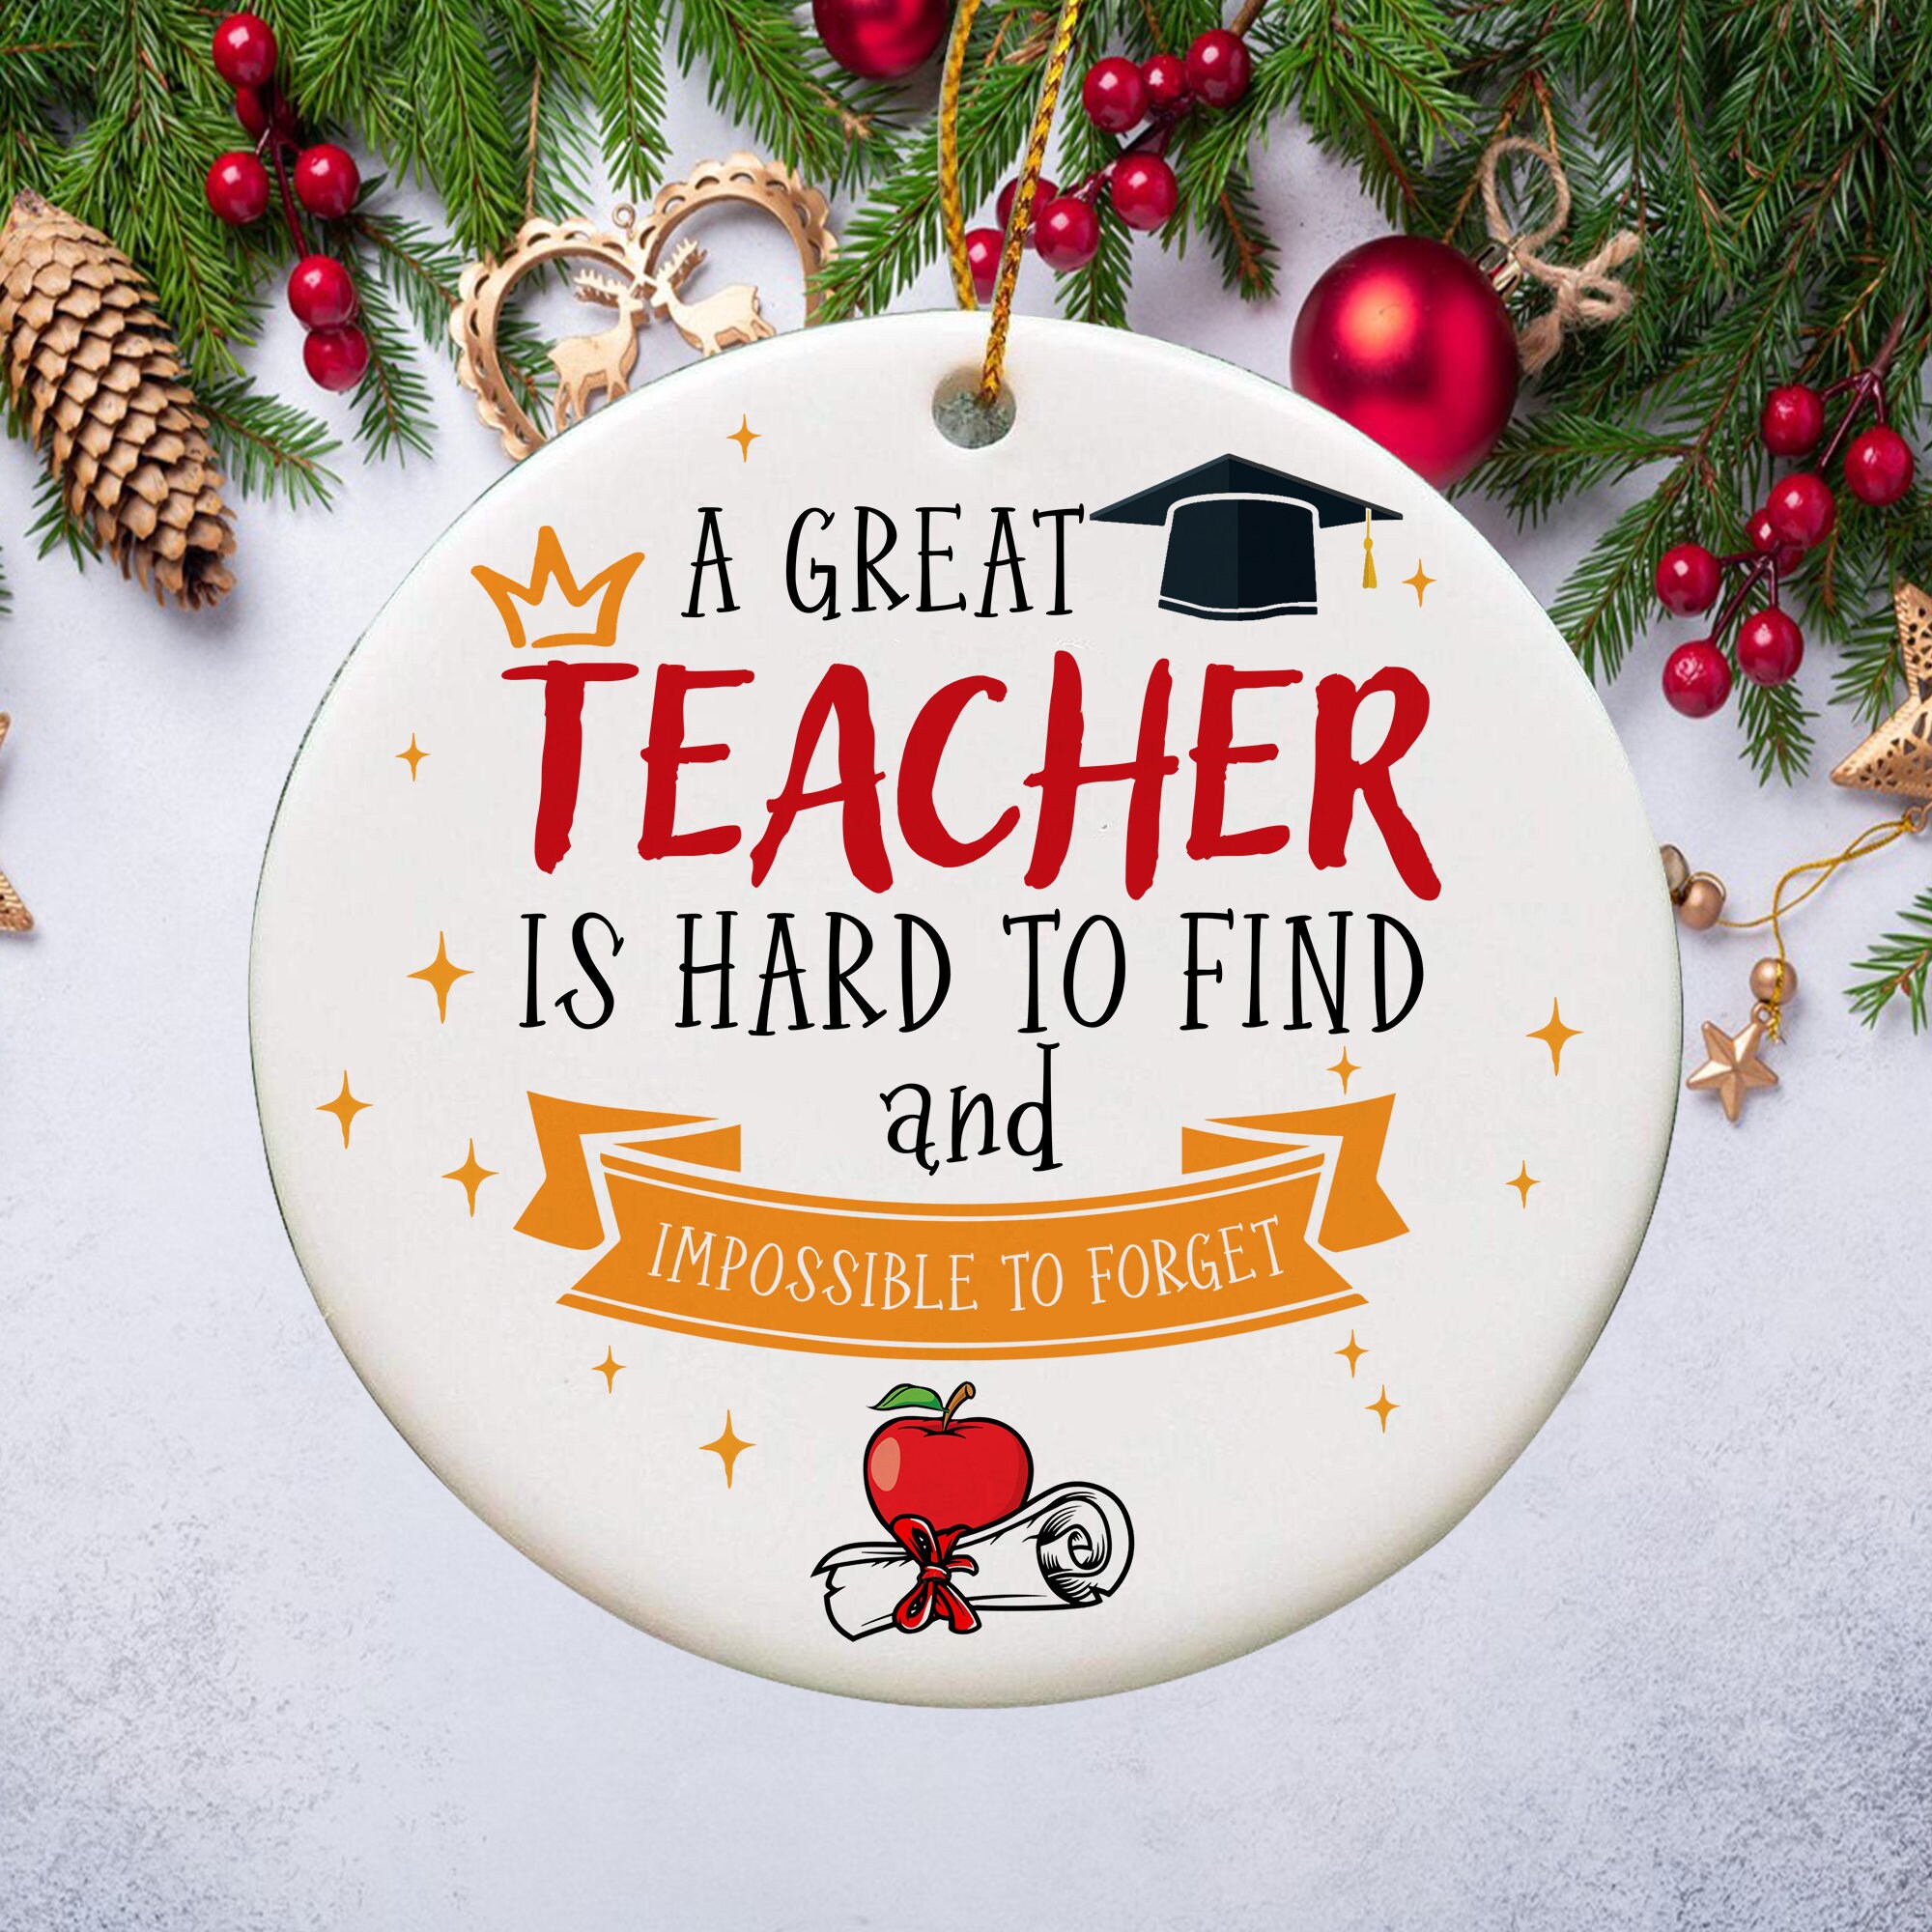 A GREAT TEACHER IS HARD TO FIND CHRISTMAS ORNAMENT NEW GIFT FOR TEACHER